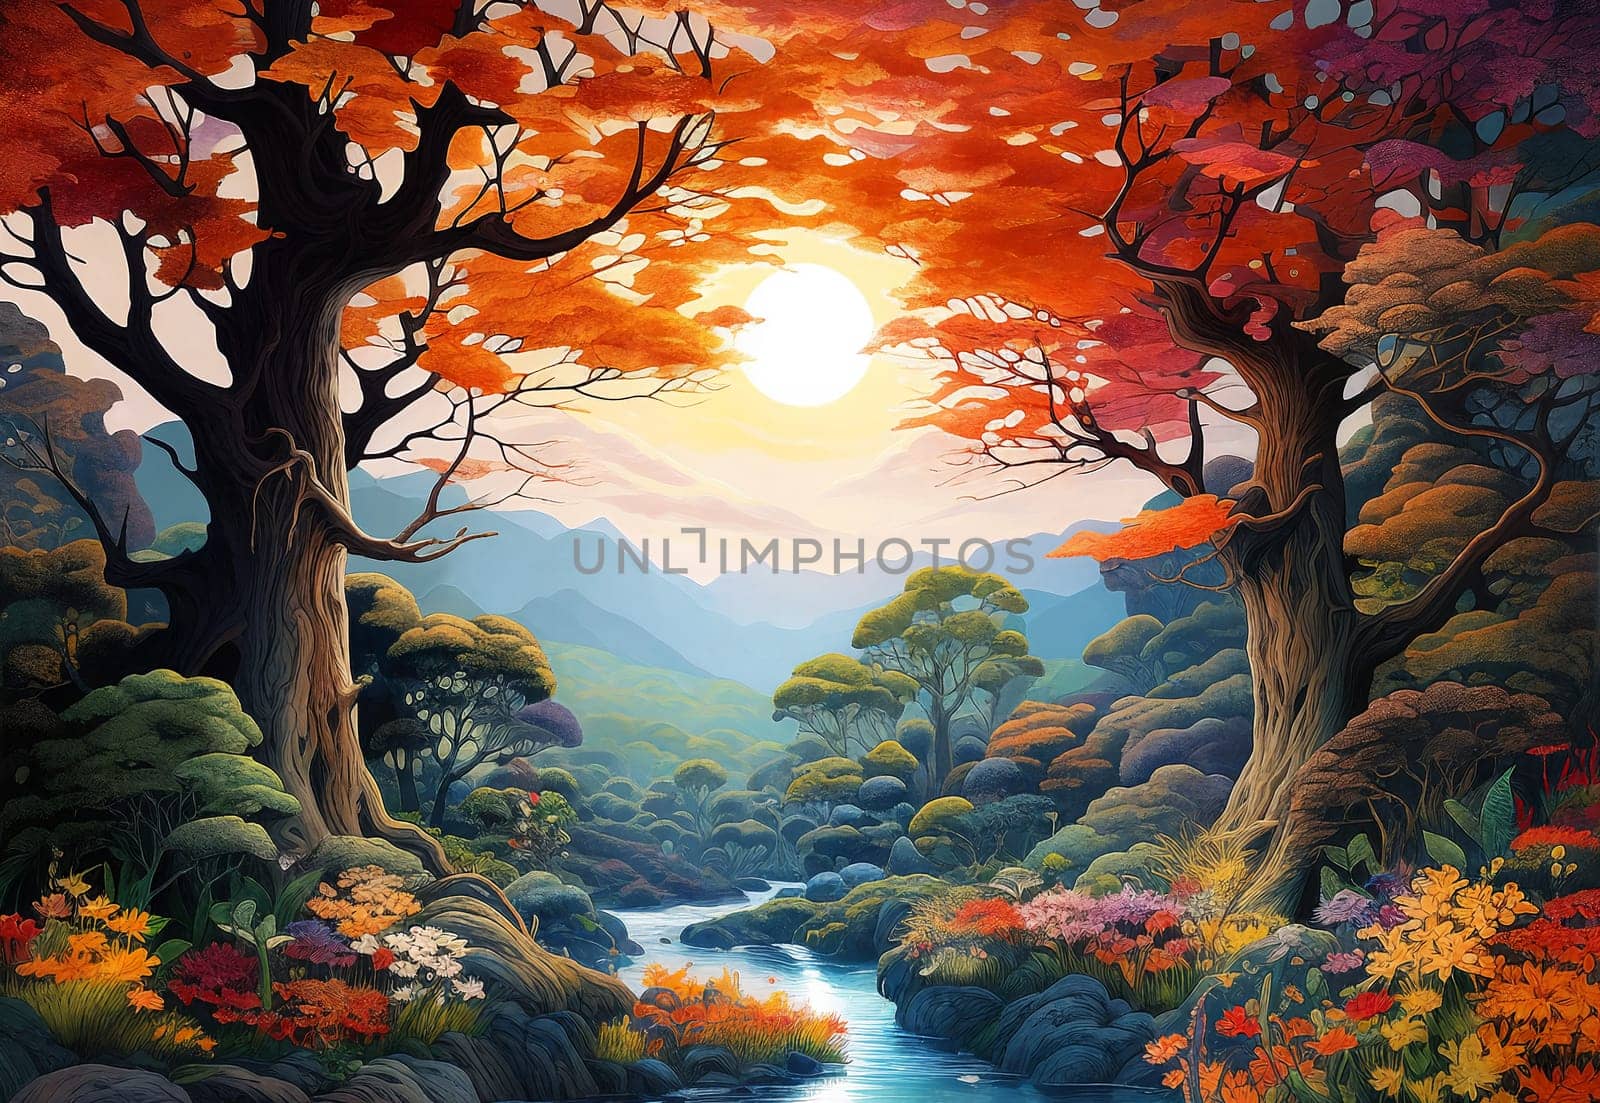 A stunning autumn landscape with a red tree, tropical mountain flowers, and a river panorama. The light shining through the trees creates a beautiful ambiance